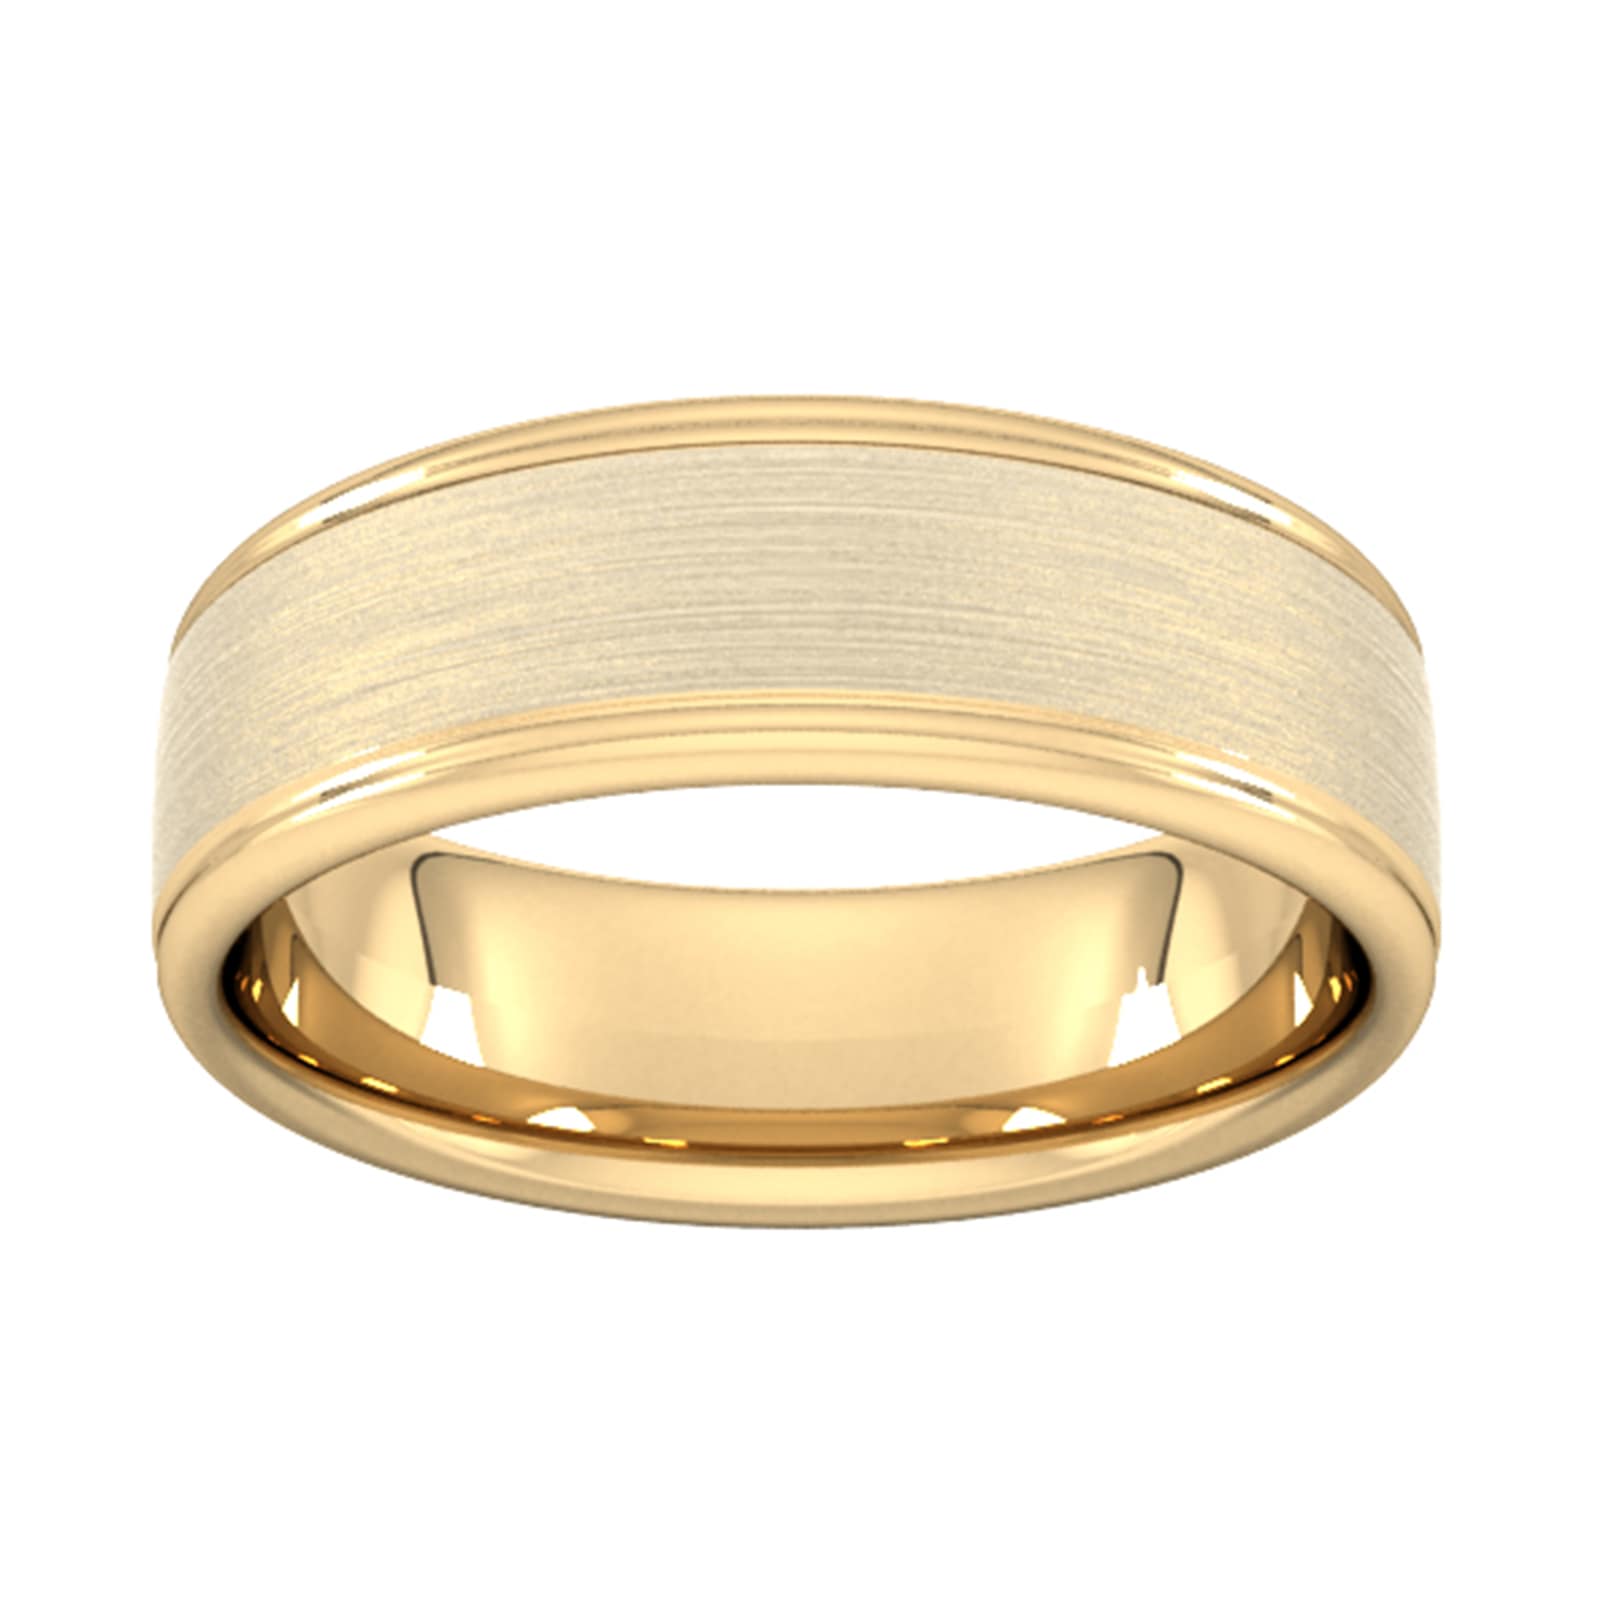 7mm D Shape Heavy Matt Centre With Grooves Wedding Ring In 18 Carat Yellow Gold - Ring Size X